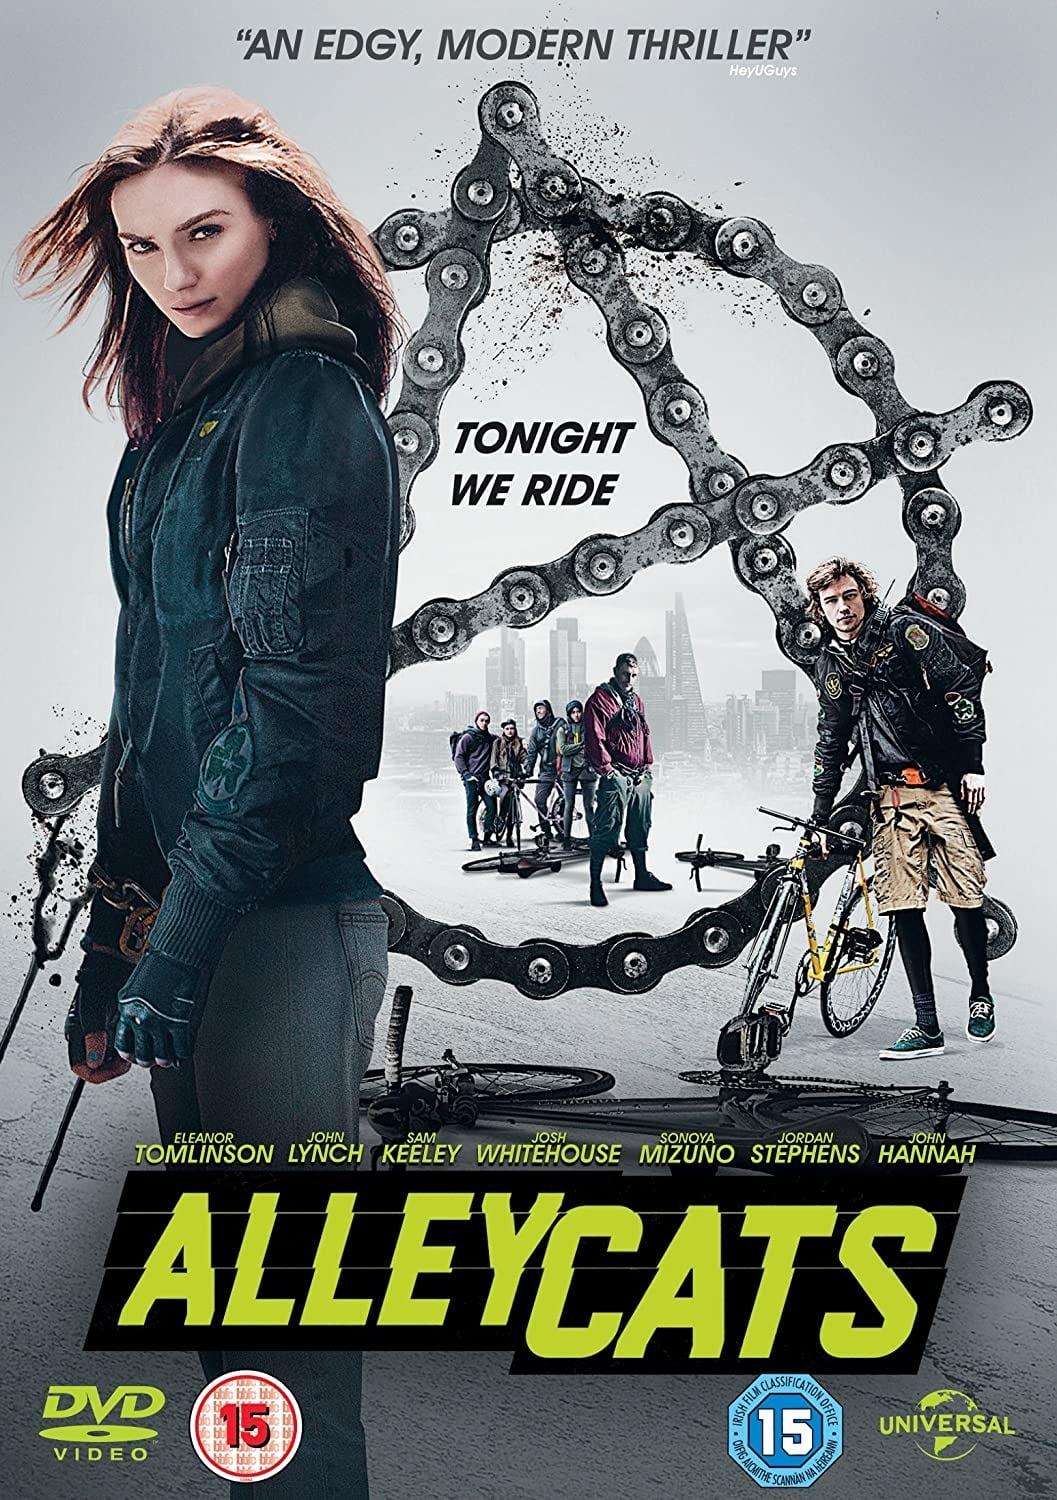 Alleycats poster